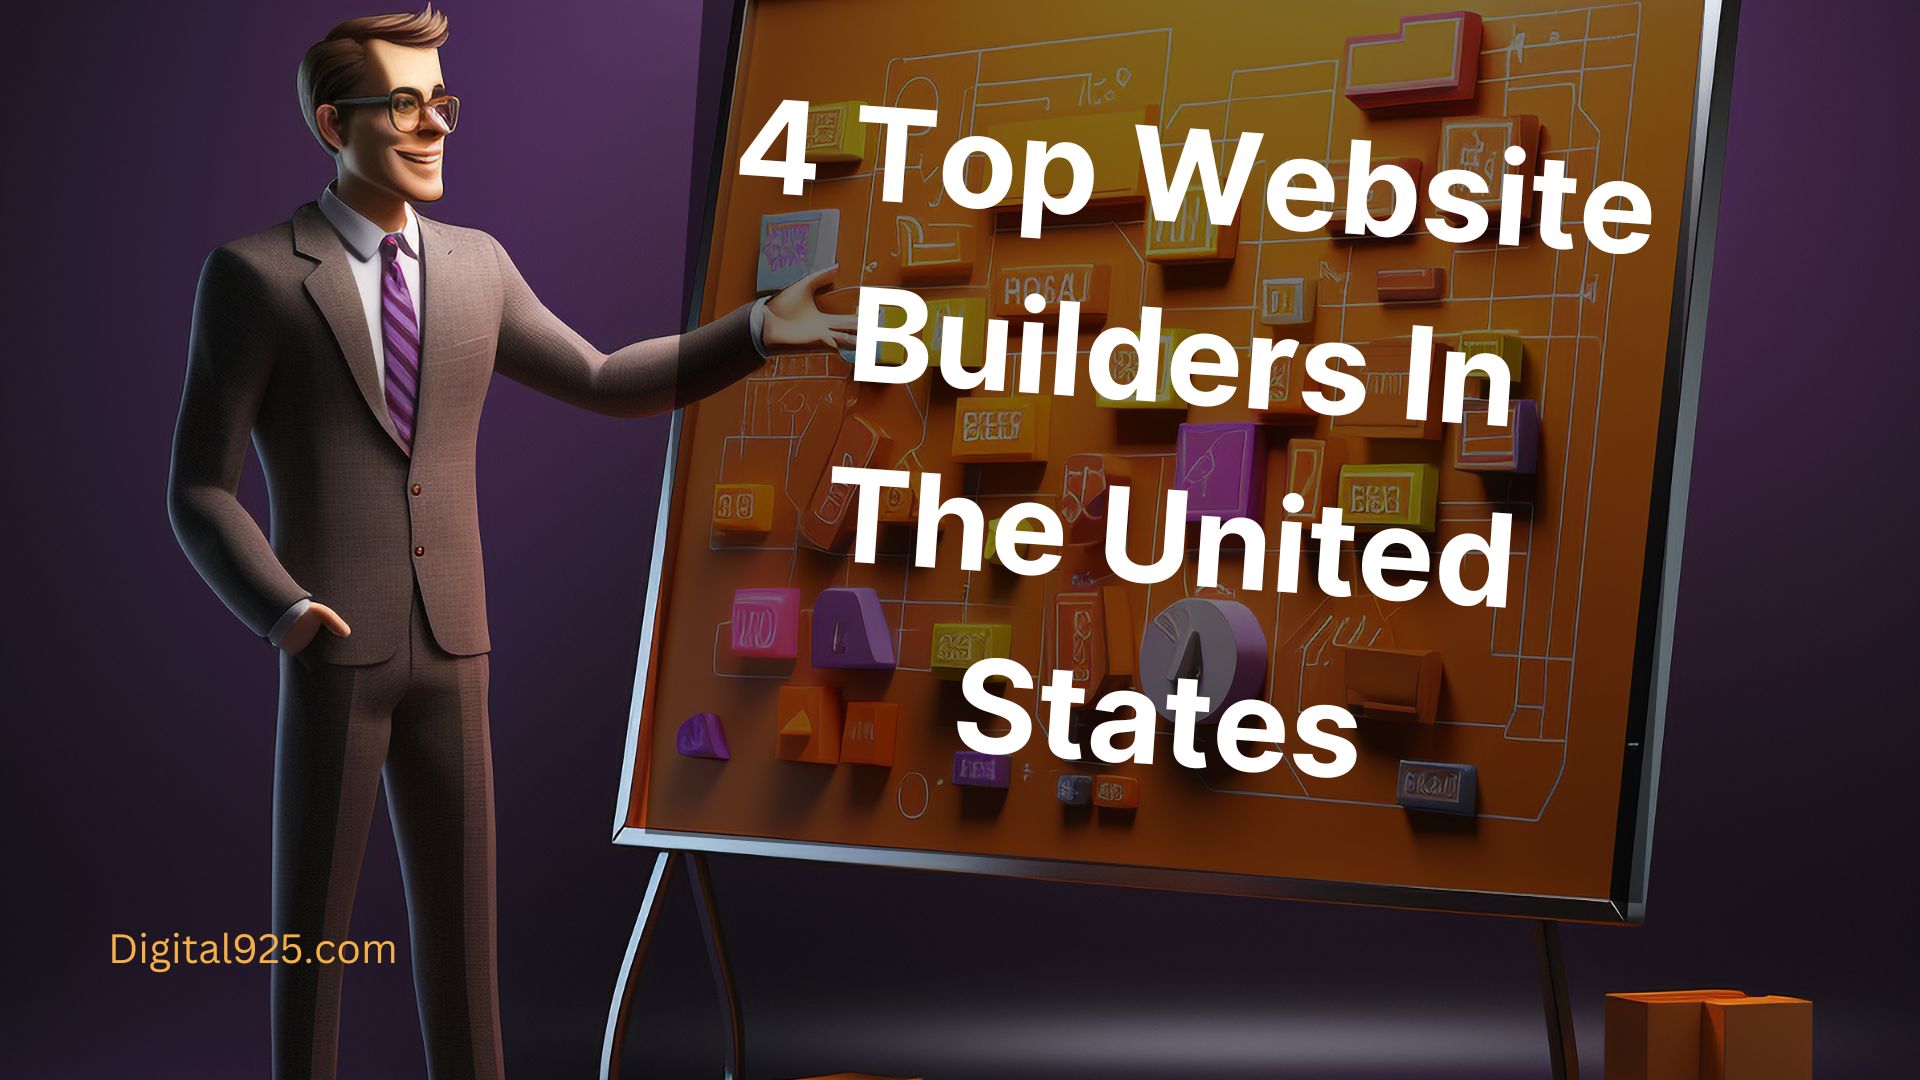 Top 4 Website Builders In The United States